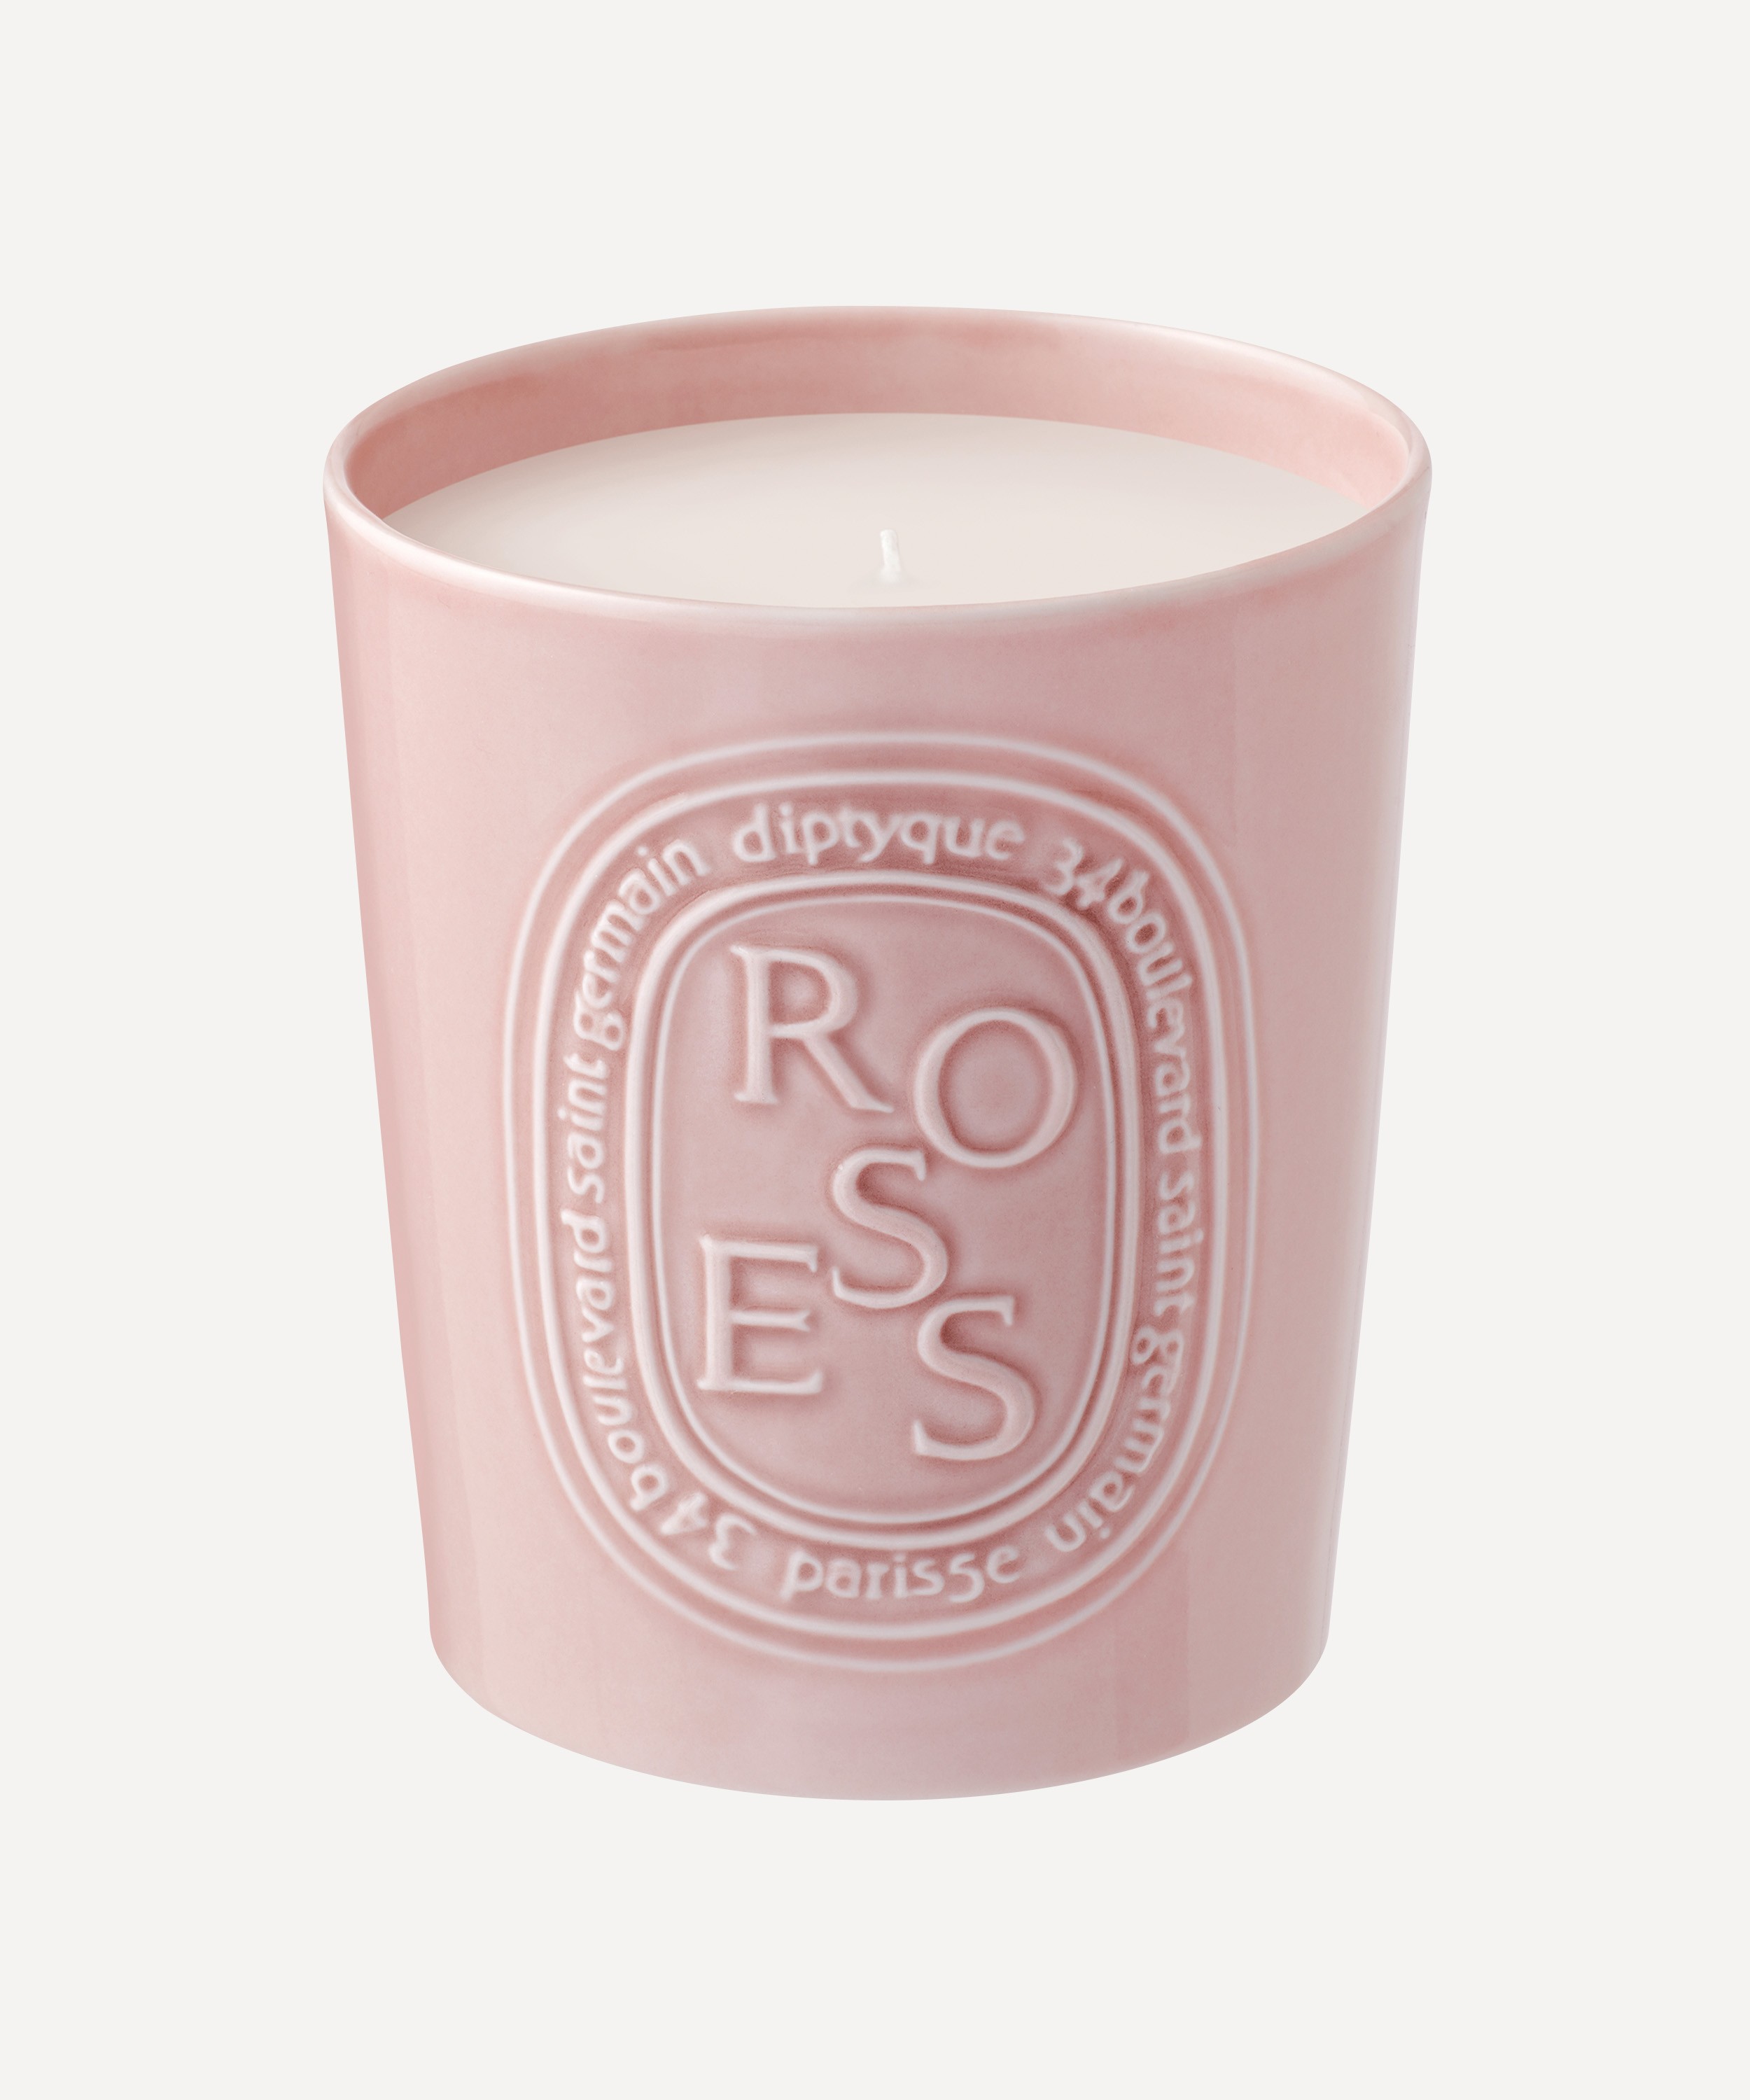 Diptyque - Roses Scented Candle 600g